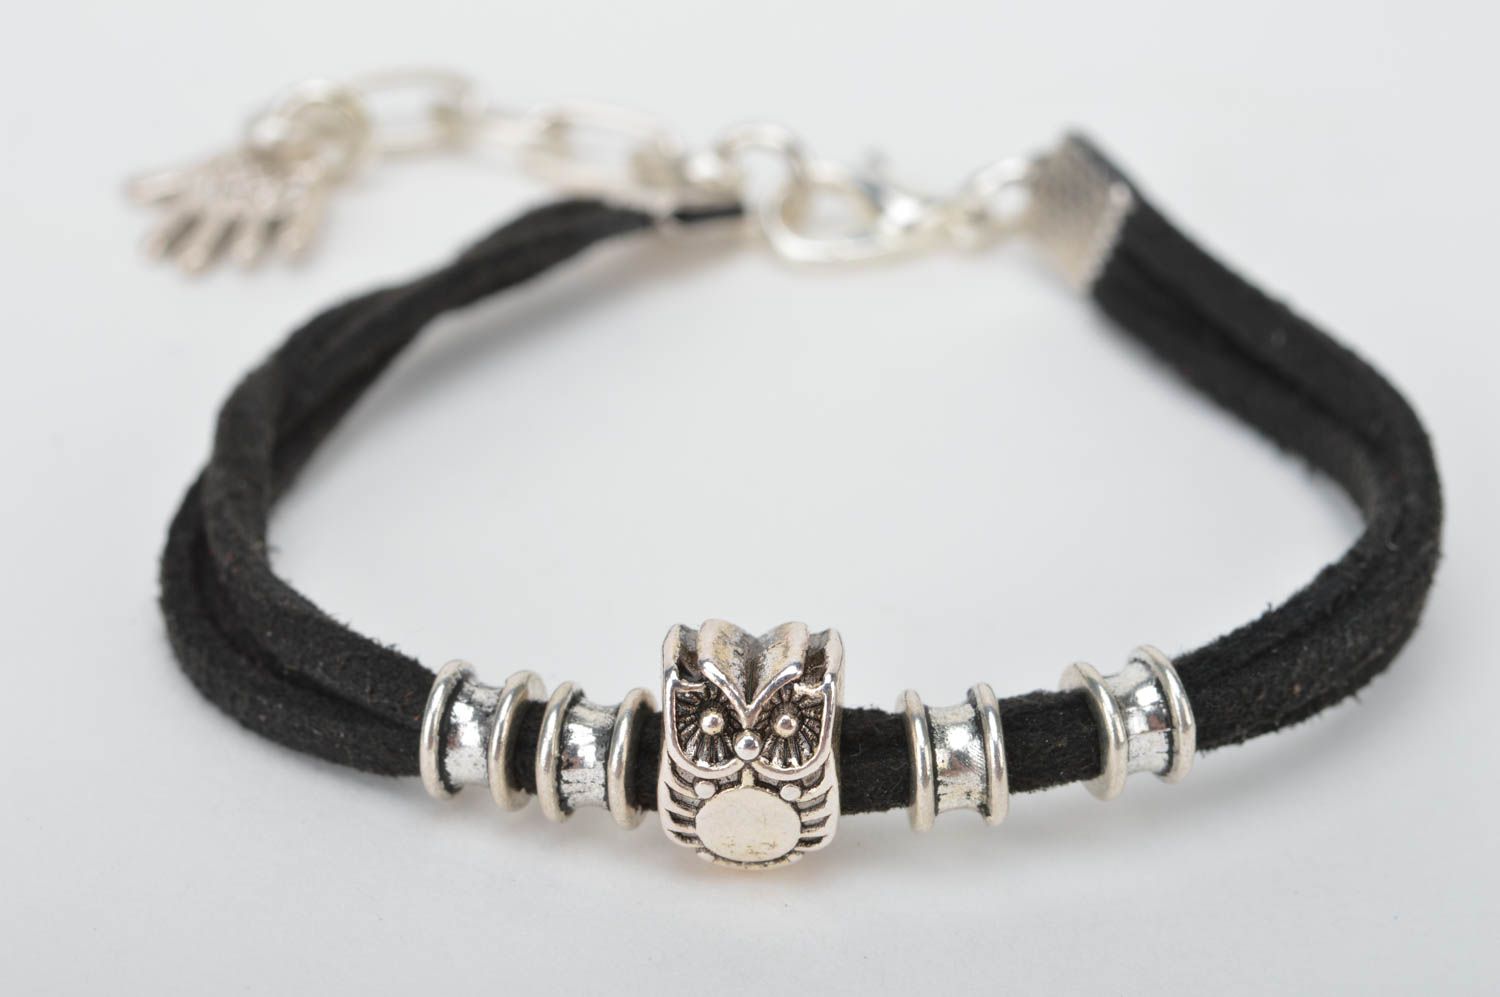 Handmade black cute bracelet made of suede laces with charms made of metal photo 2